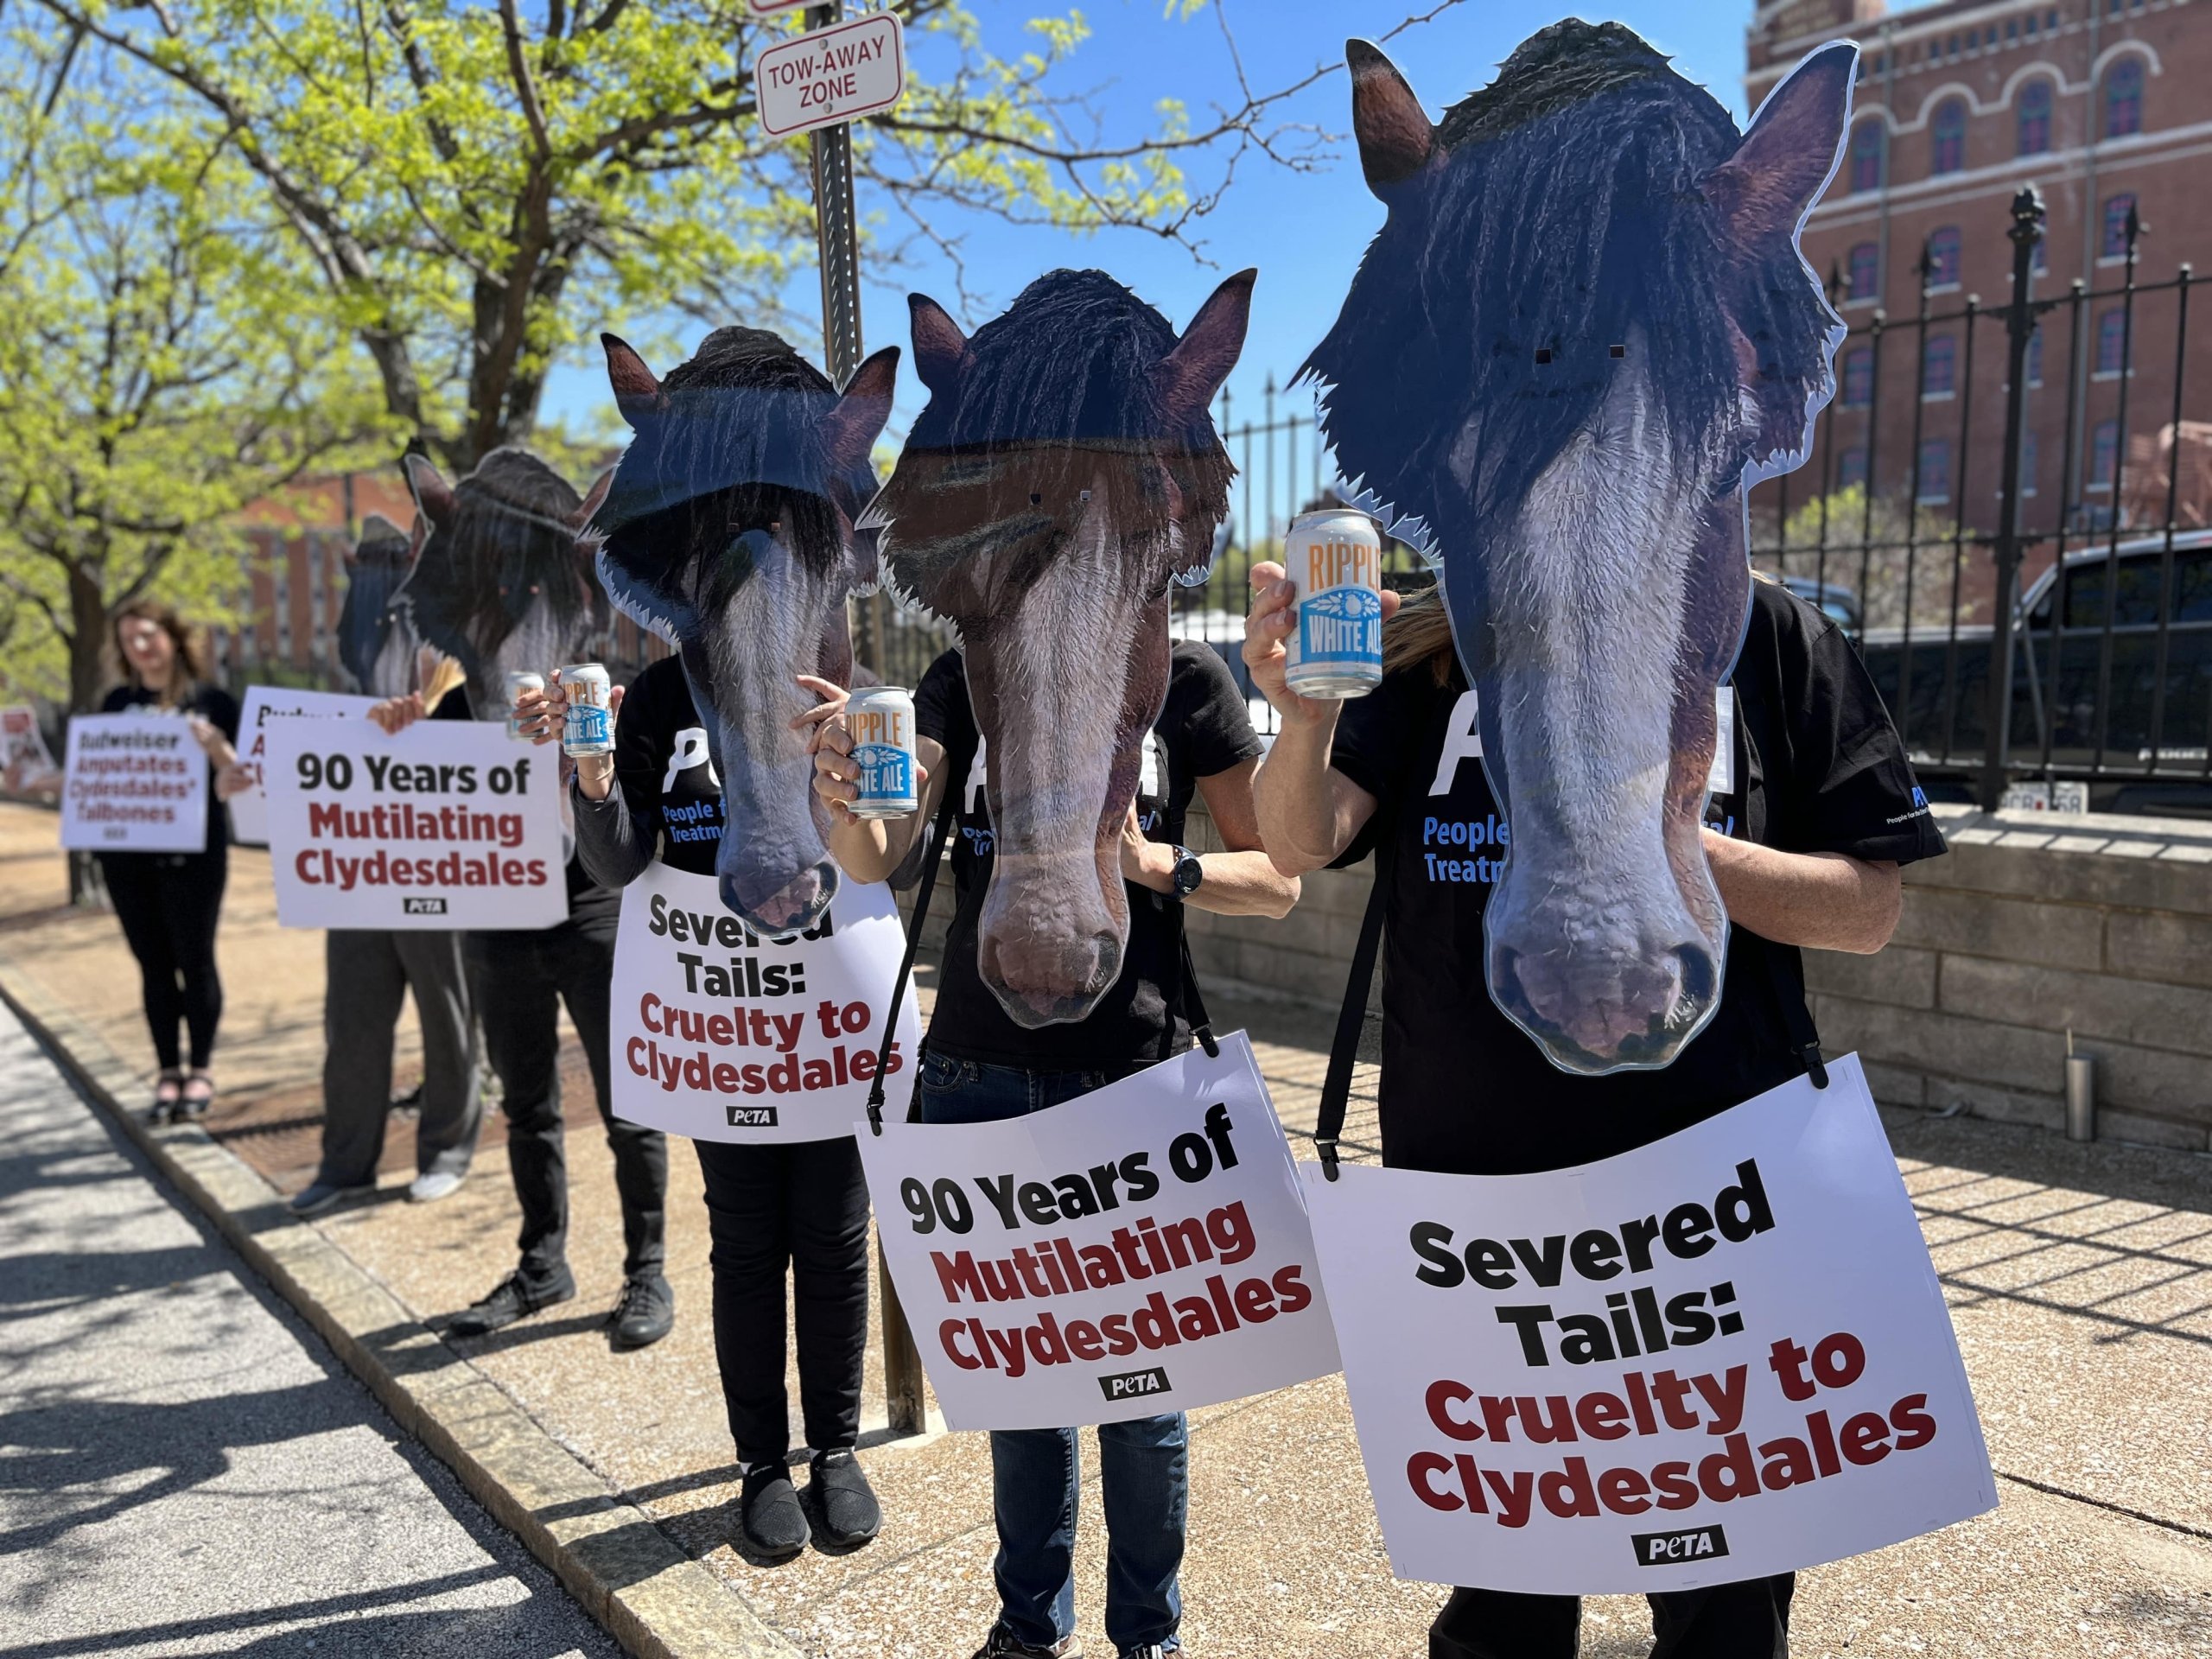 horse masked protesters in a row against budweiser